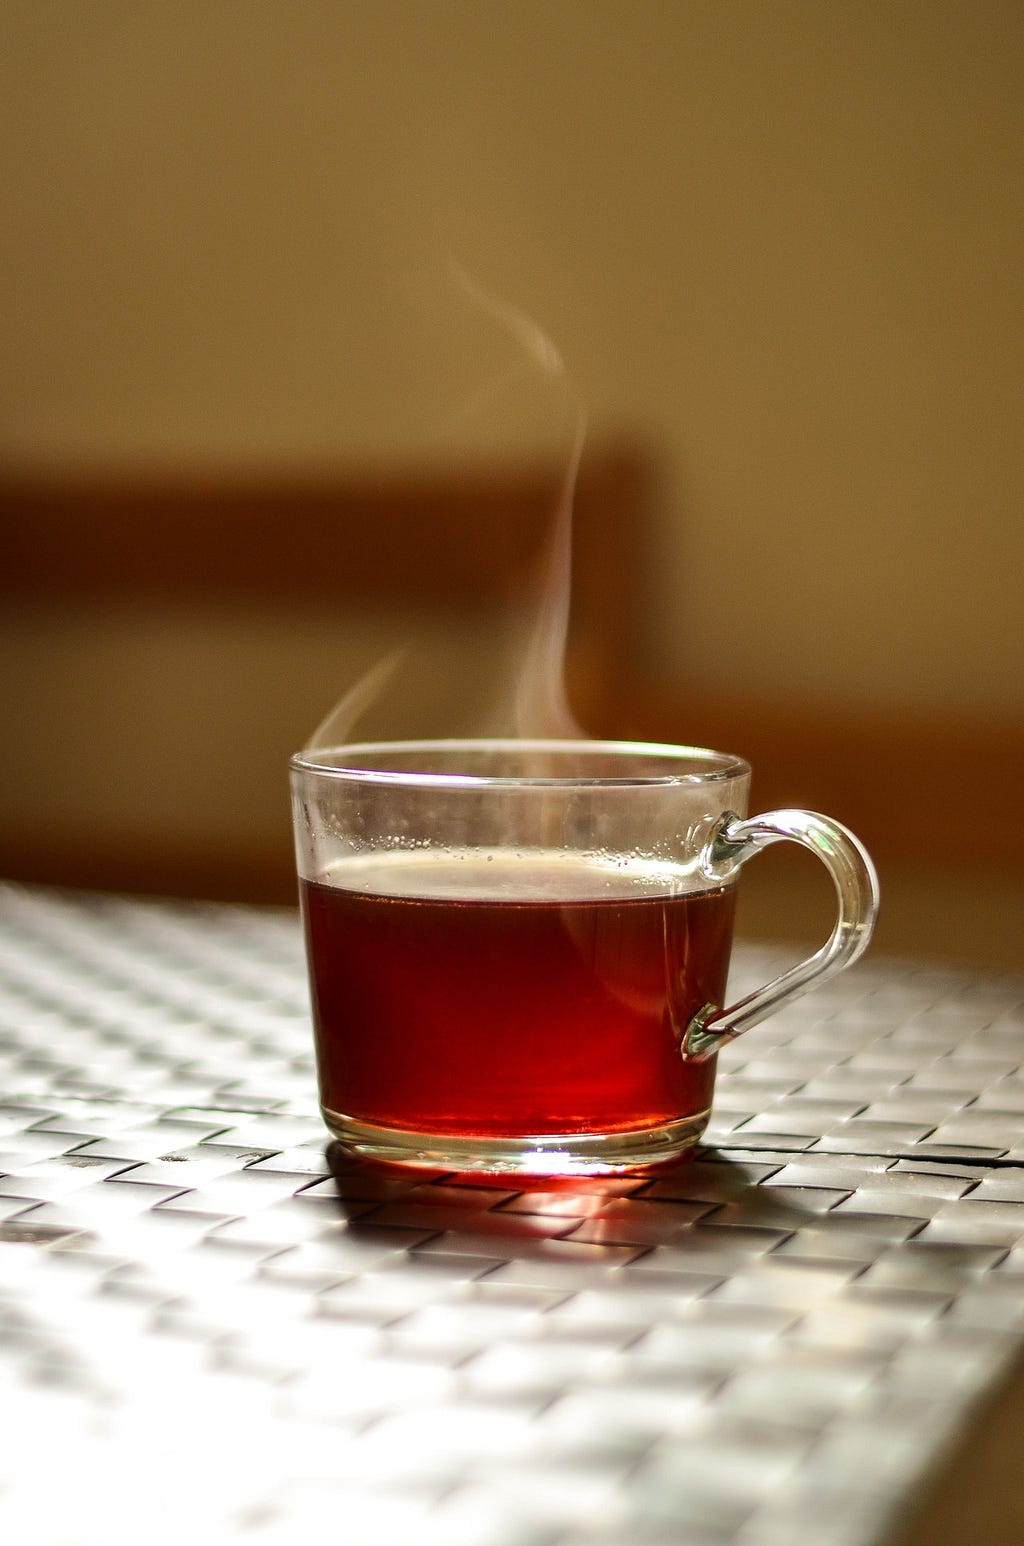 A hot cup of tea in a glass mug with steam rising